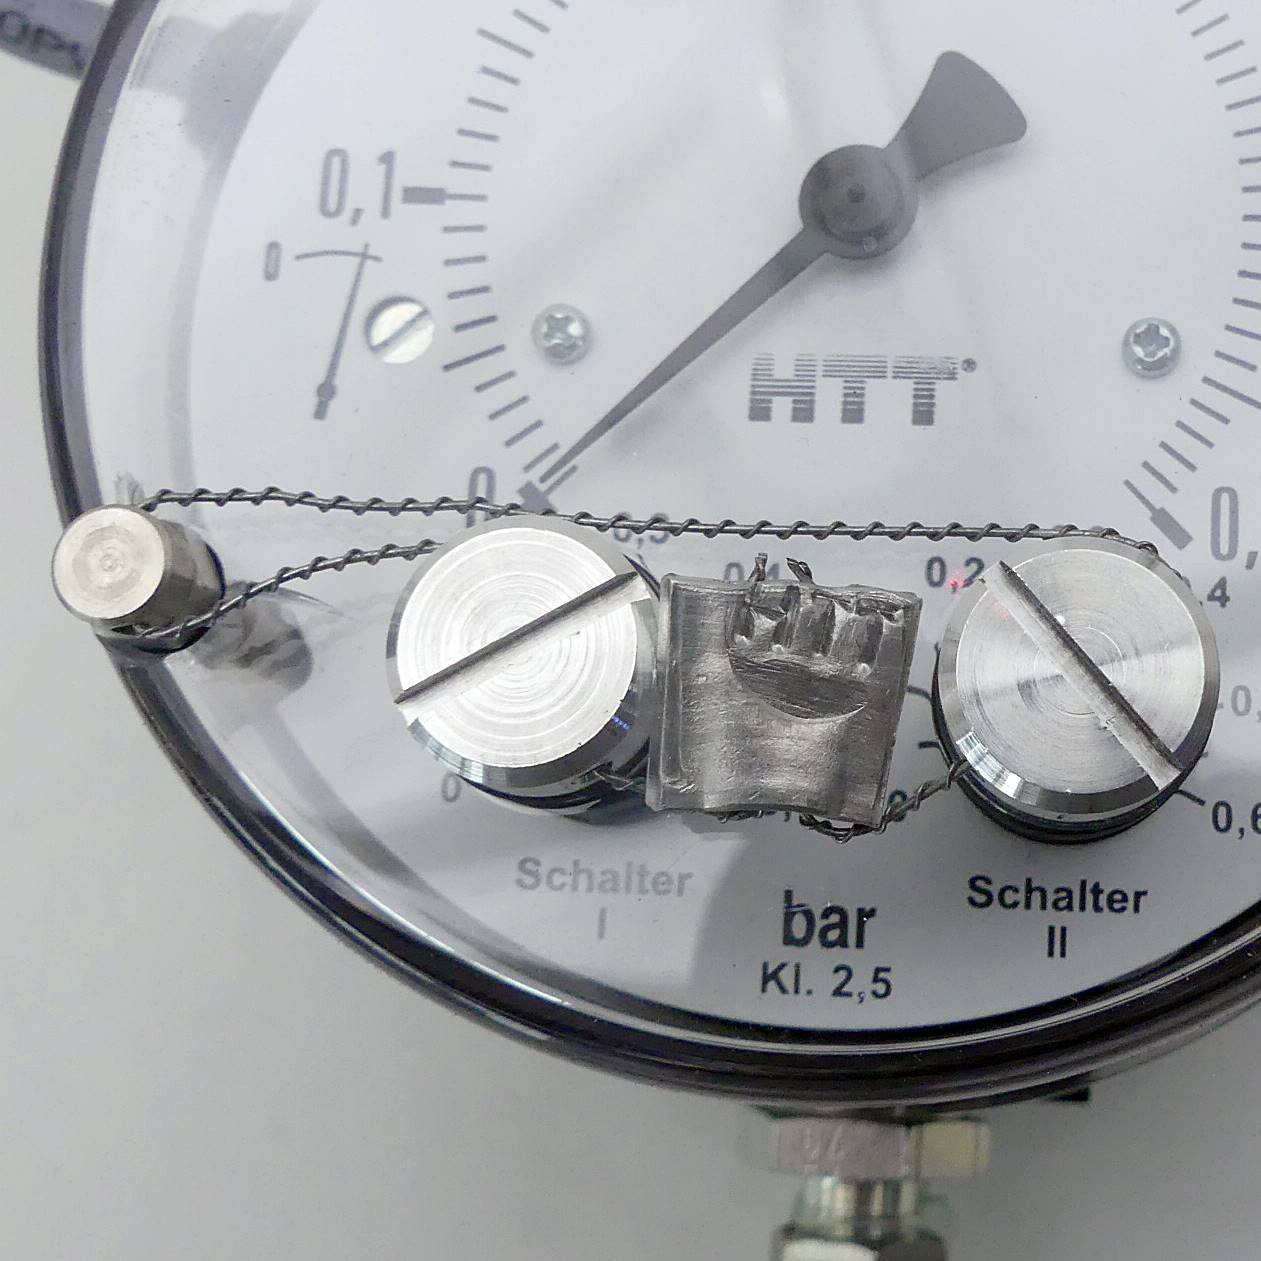 Differential pressure measuring and switching devic 